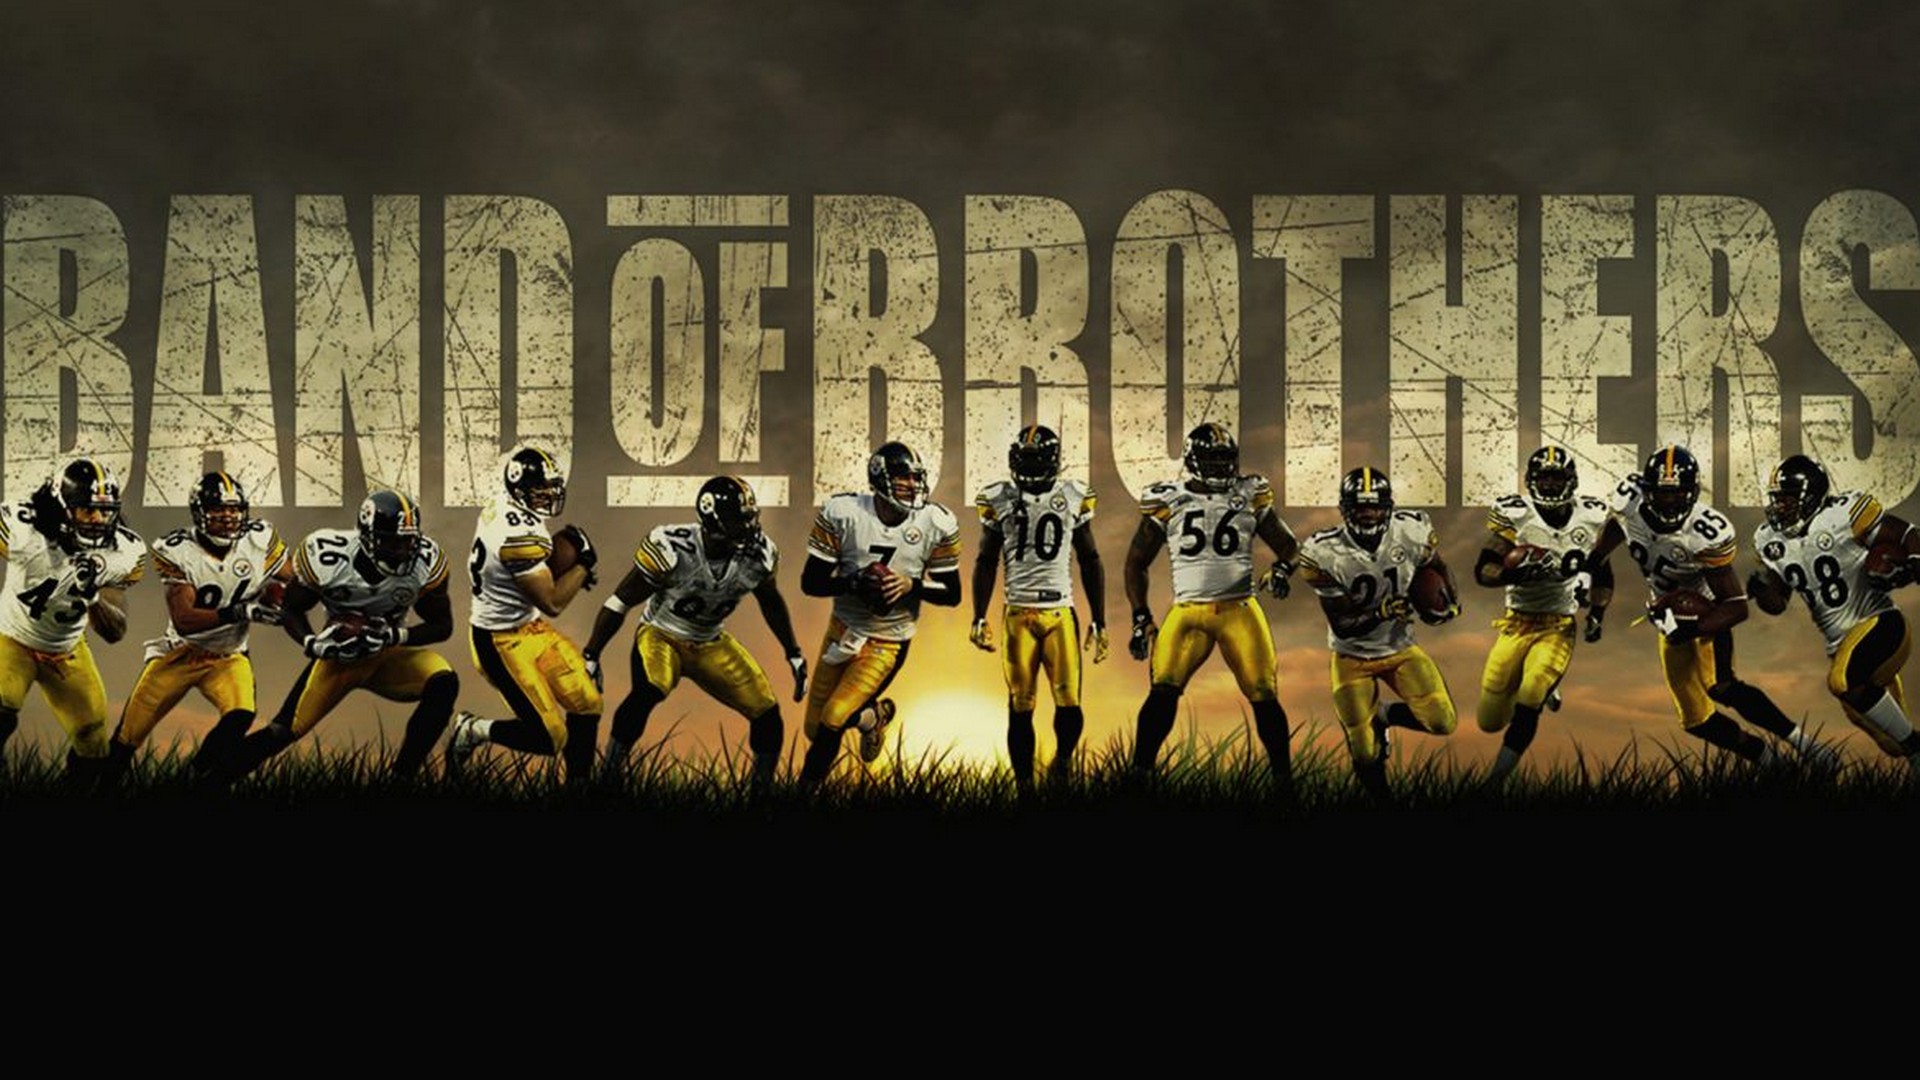 Pittsburgh Steelers Football For Pc Wallpaper With - Football Wallpaper Pittsburgh Steelers - HD Wallpaper 